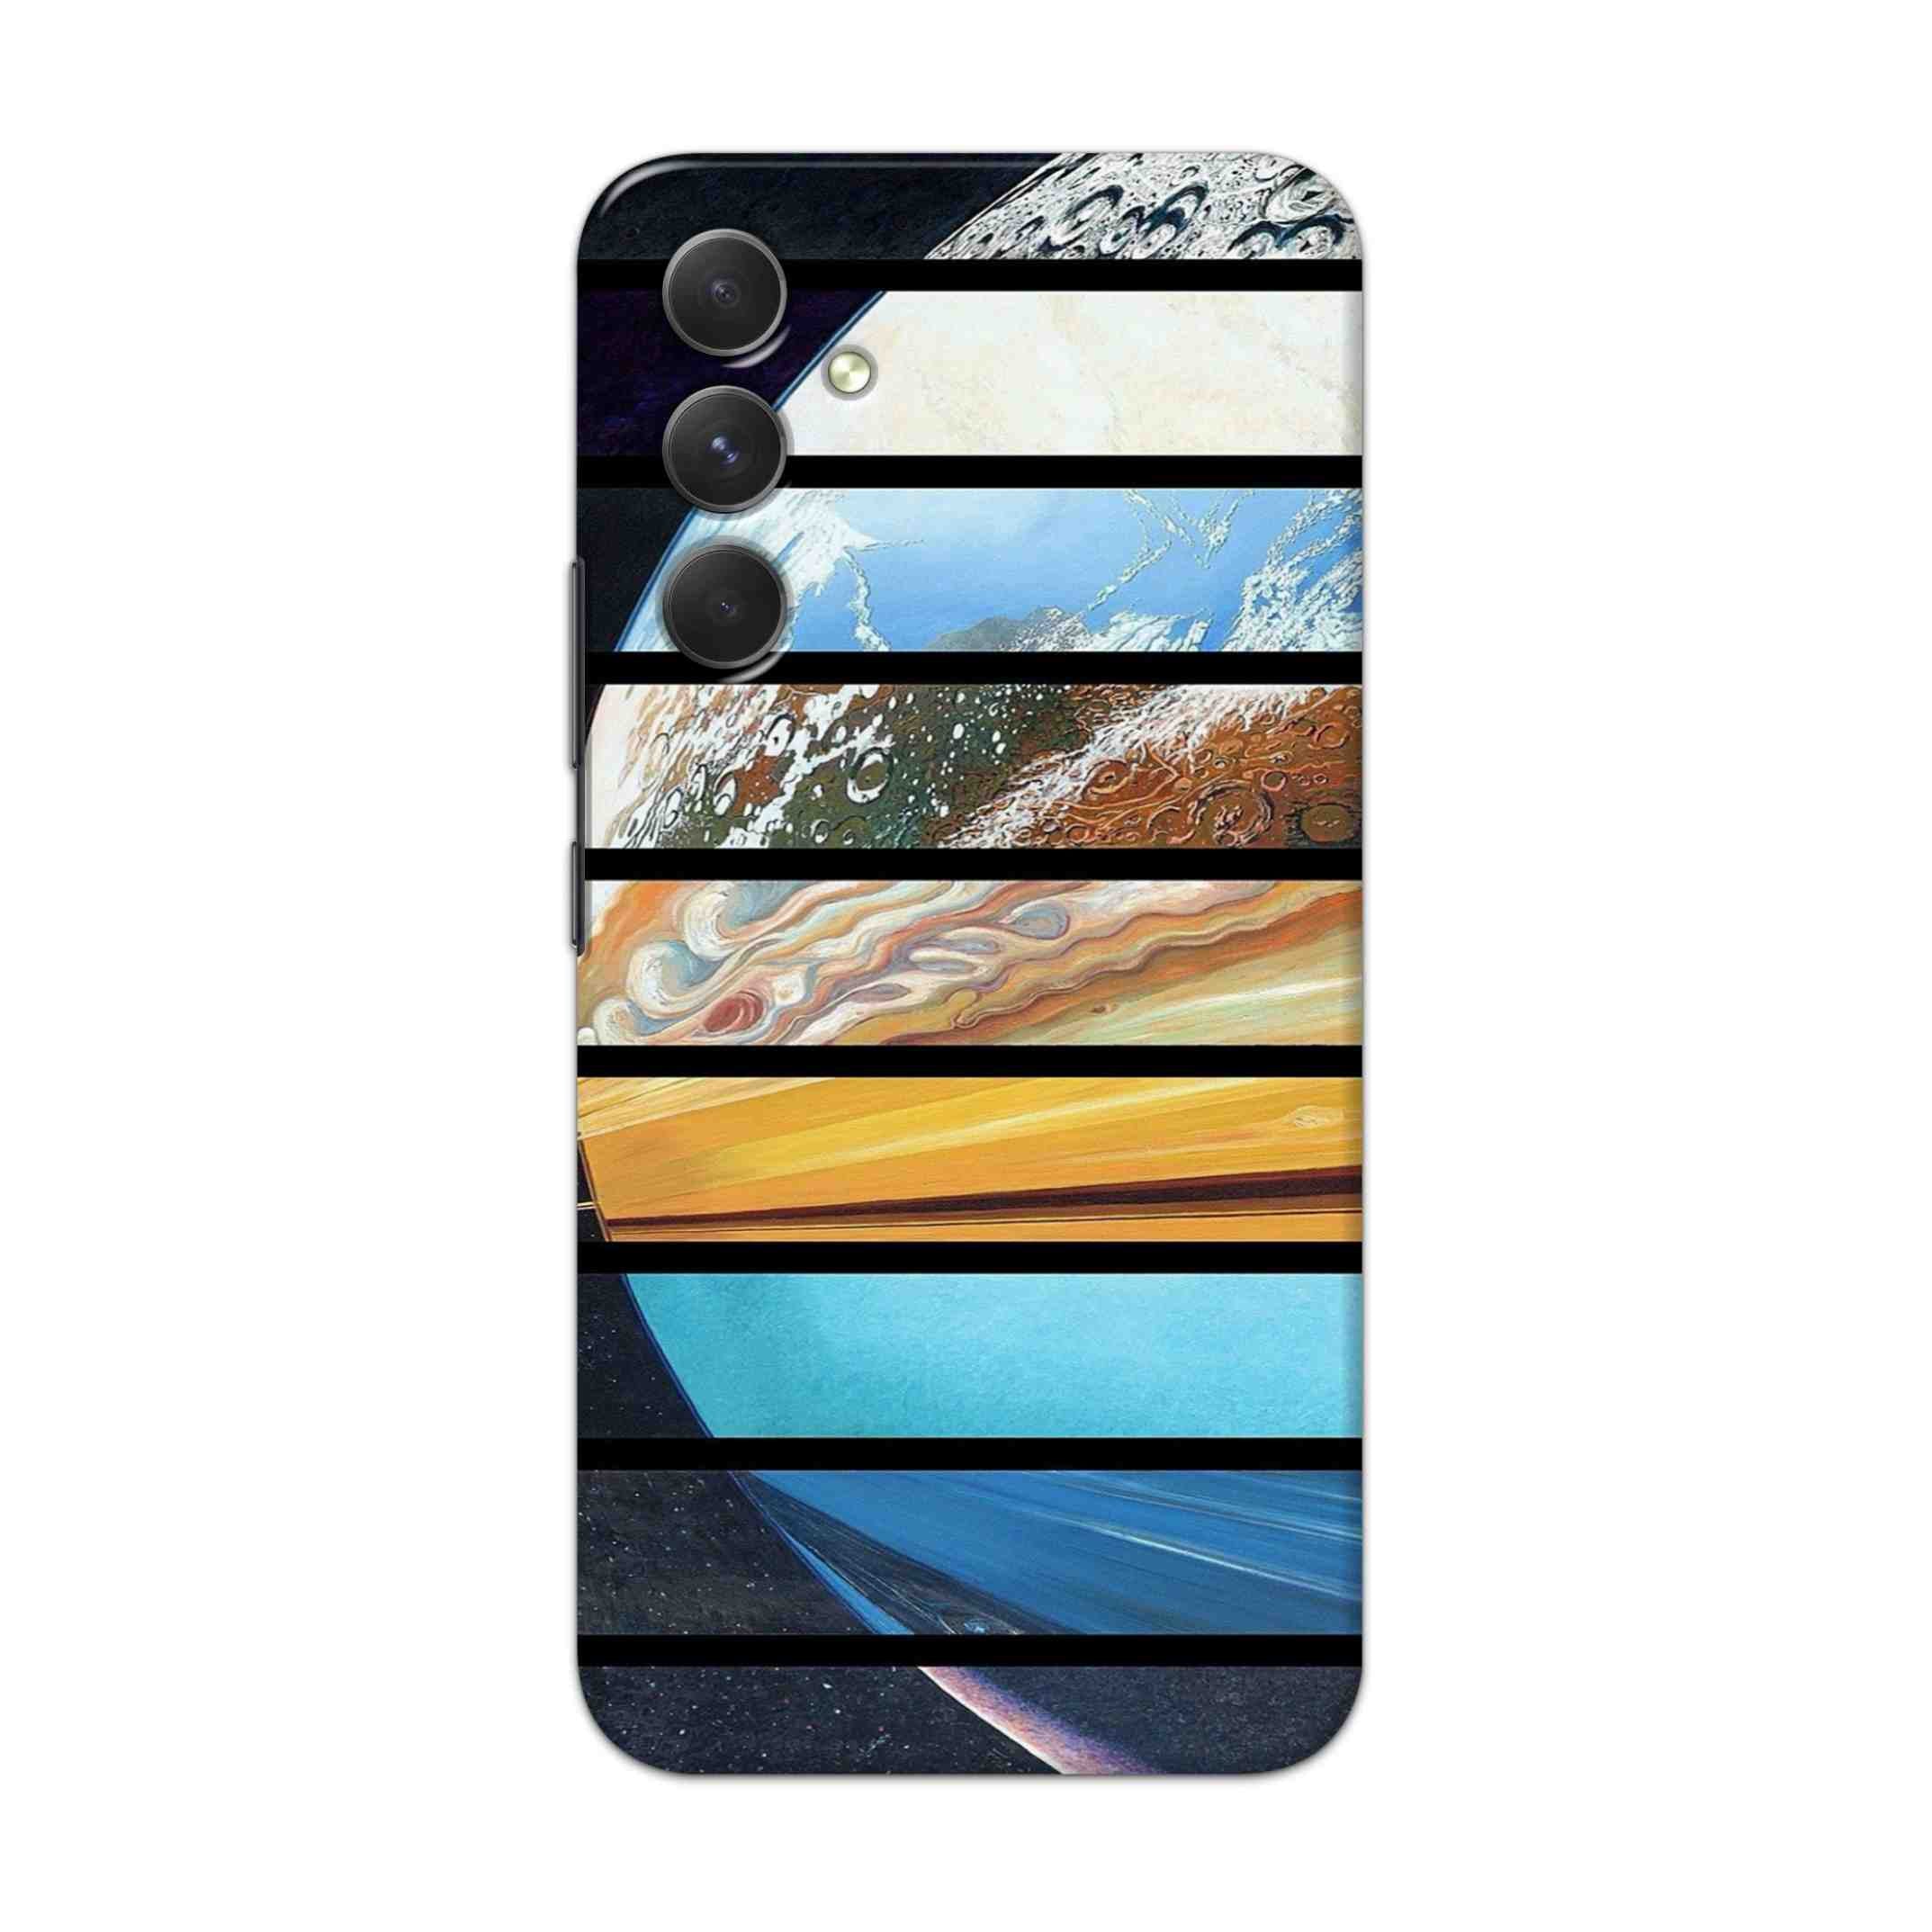 Buy Colourful Earth Hard Back Mobile Phone Case Cover For Samsung Galaxy A54 5G Online